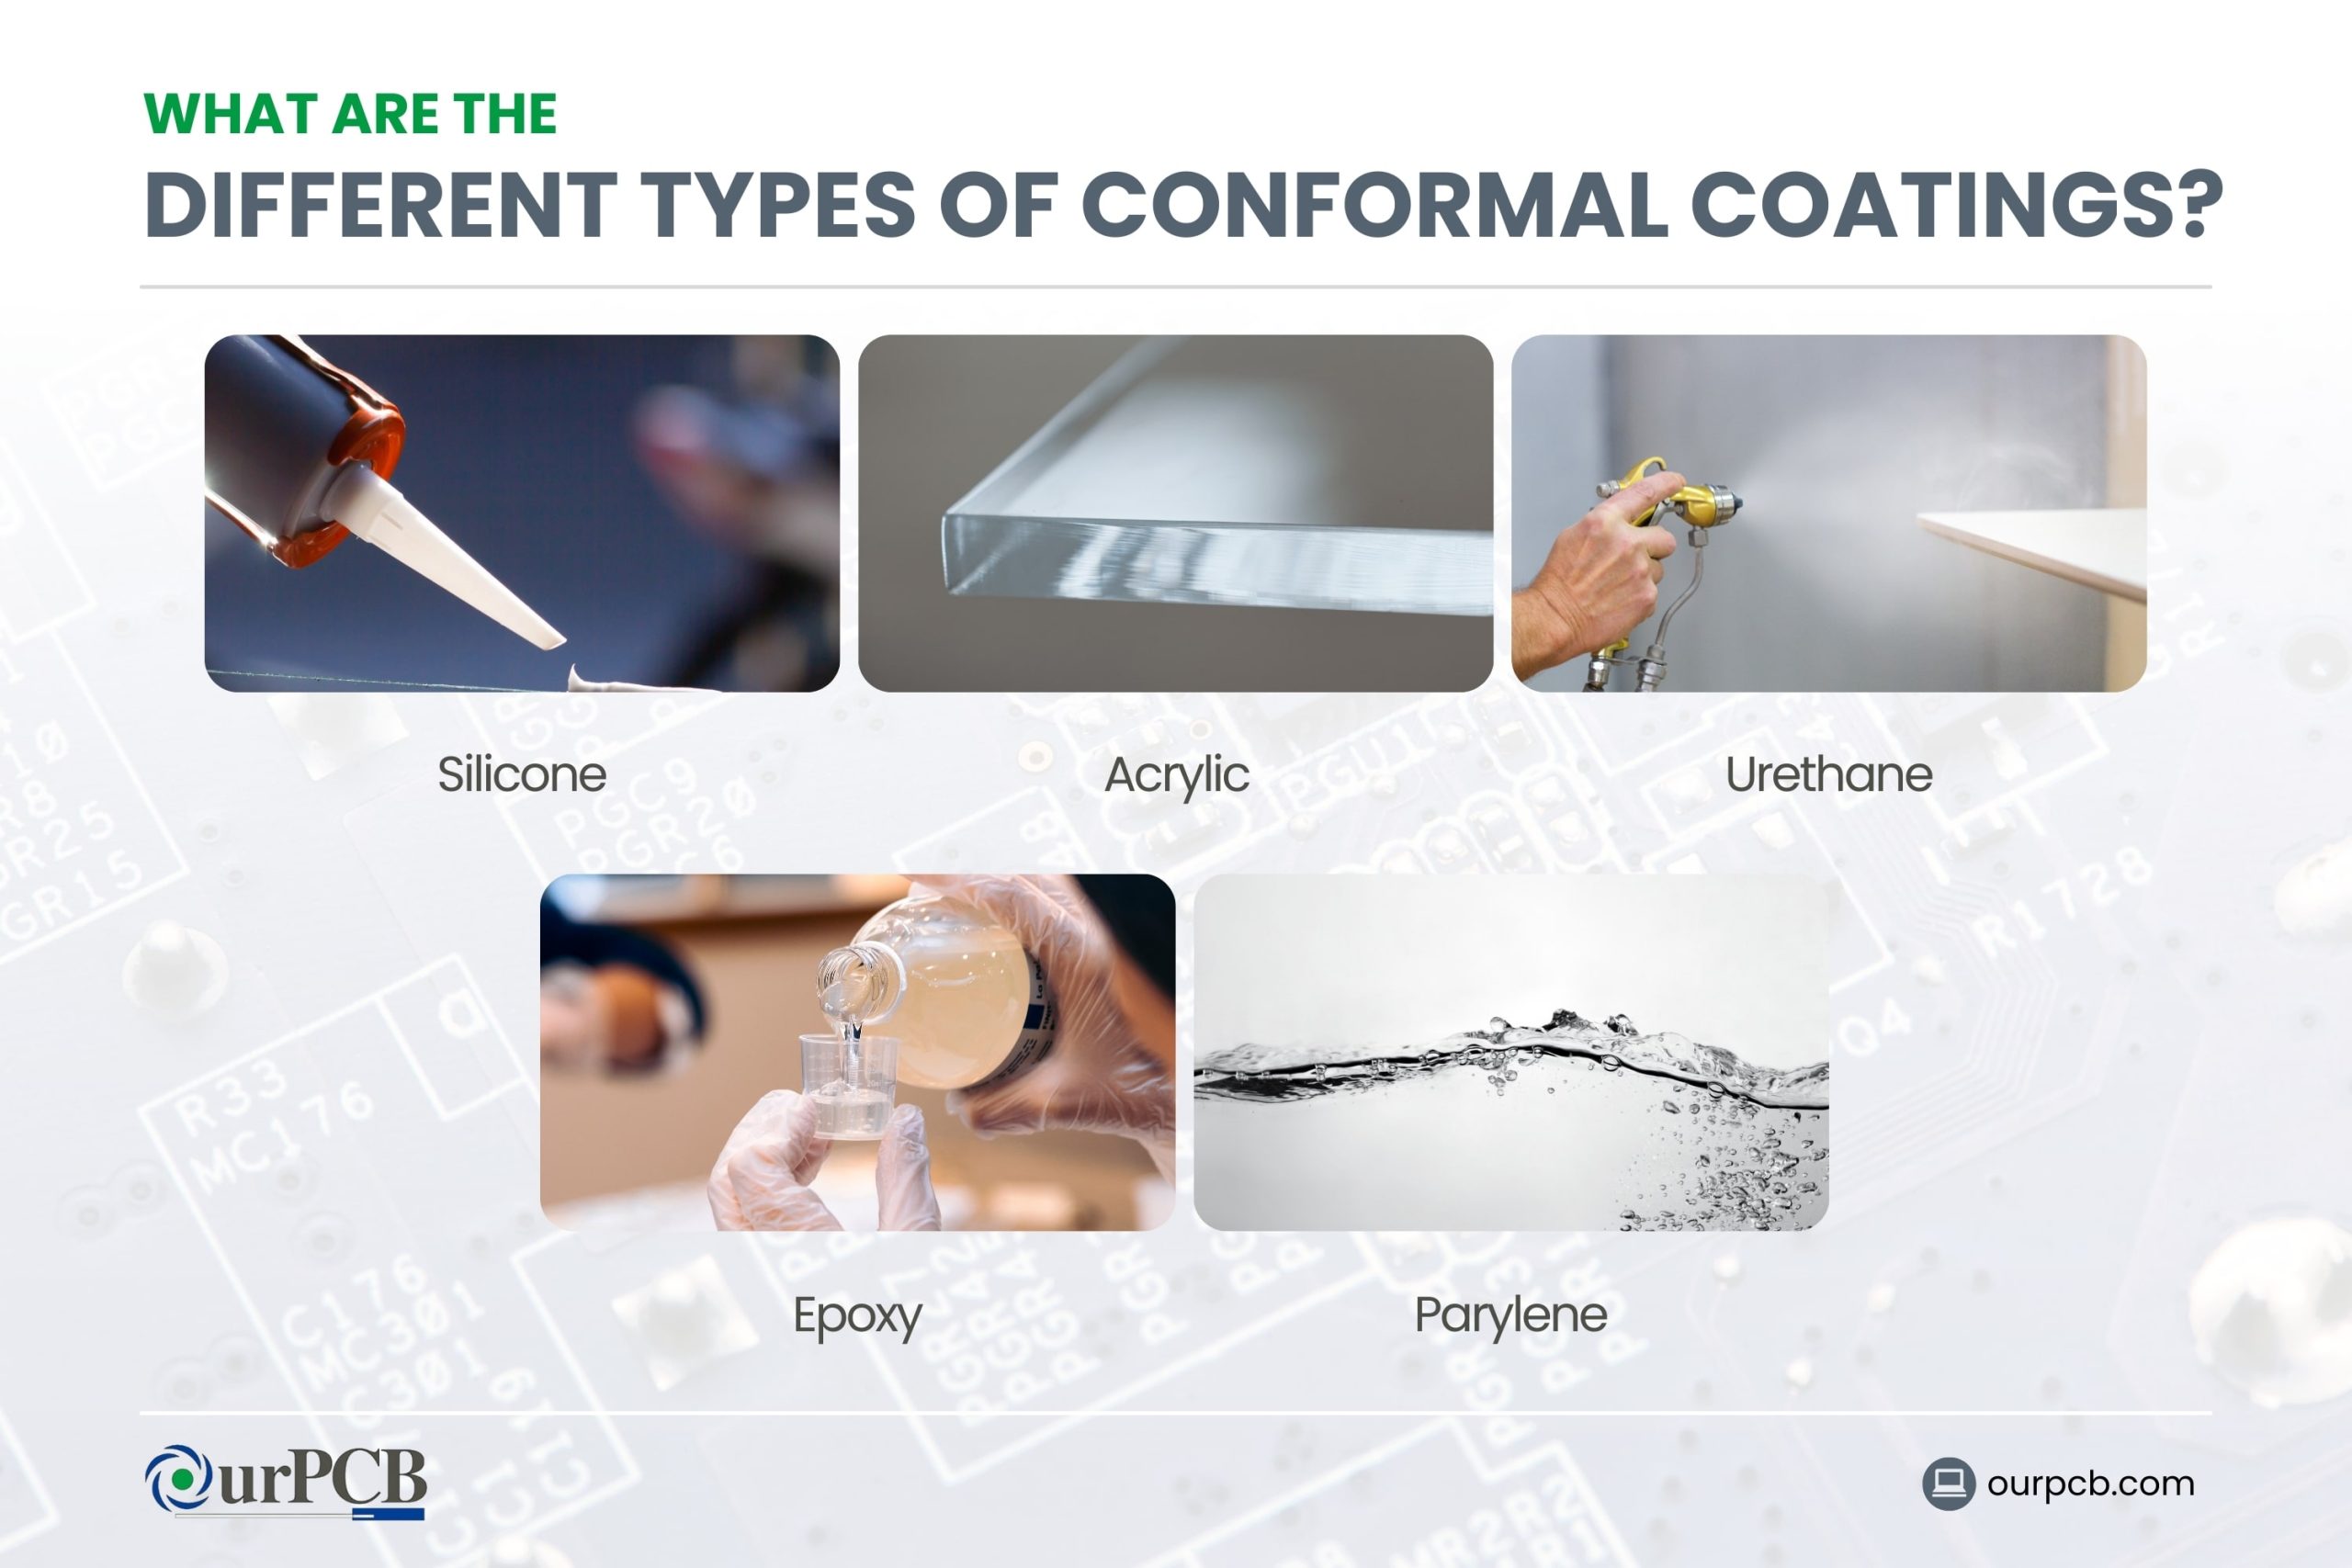 What Are the Different Types of Conformal Coatings